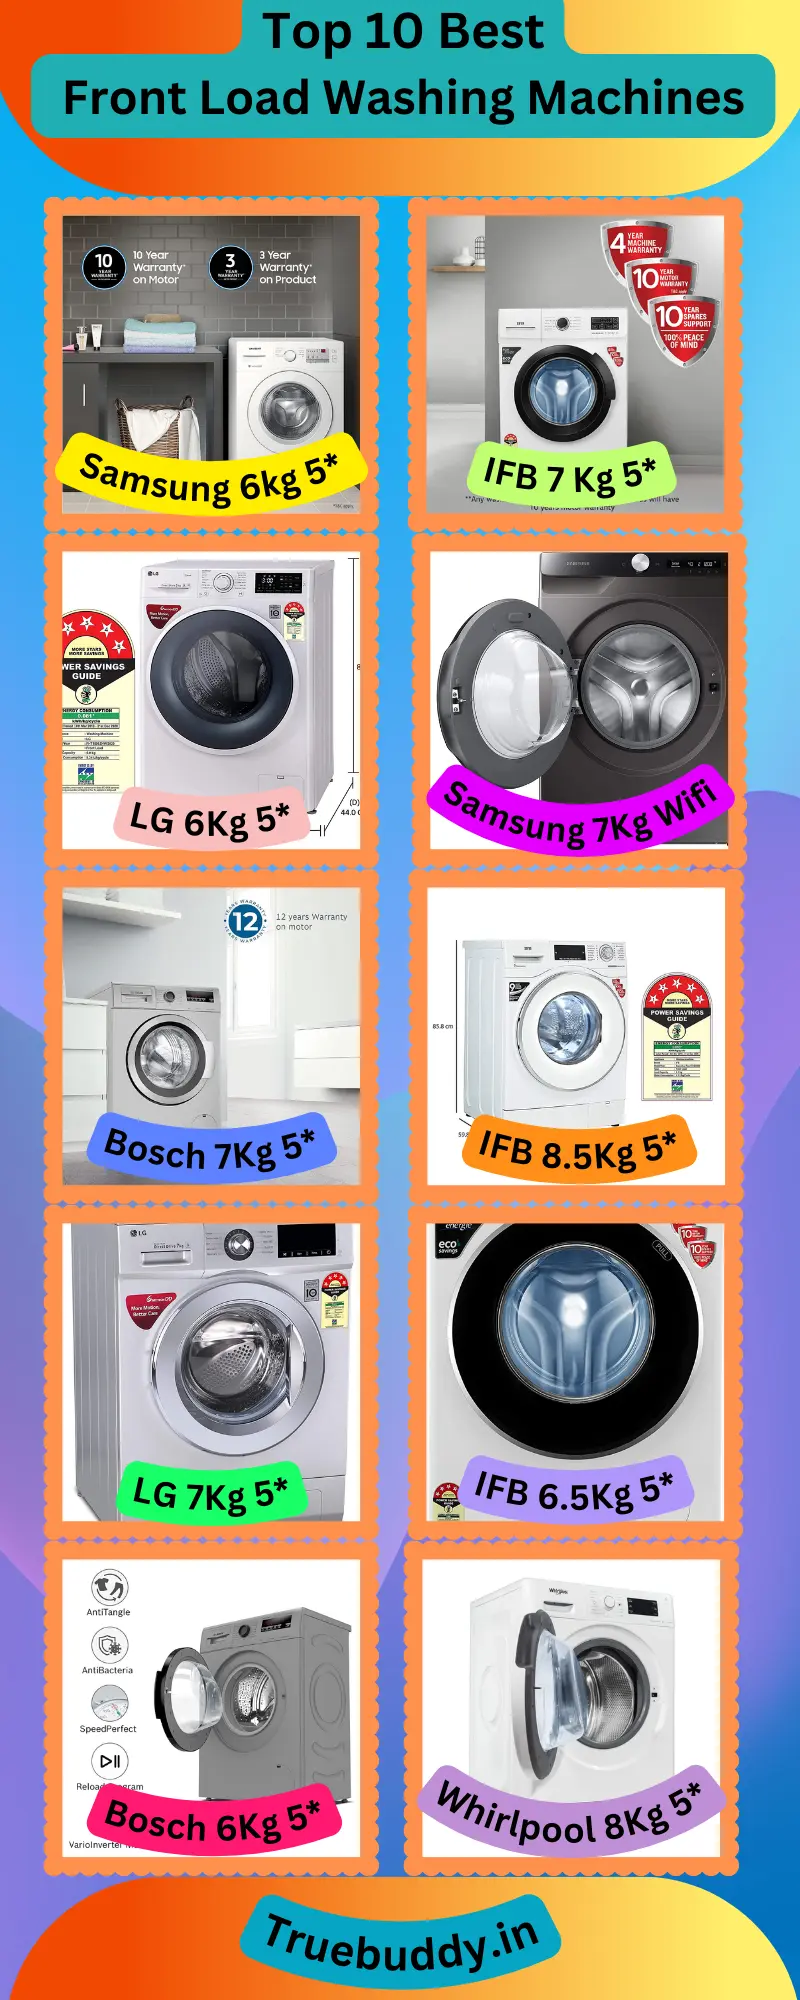 10 Best Front Load Washing Machines in India